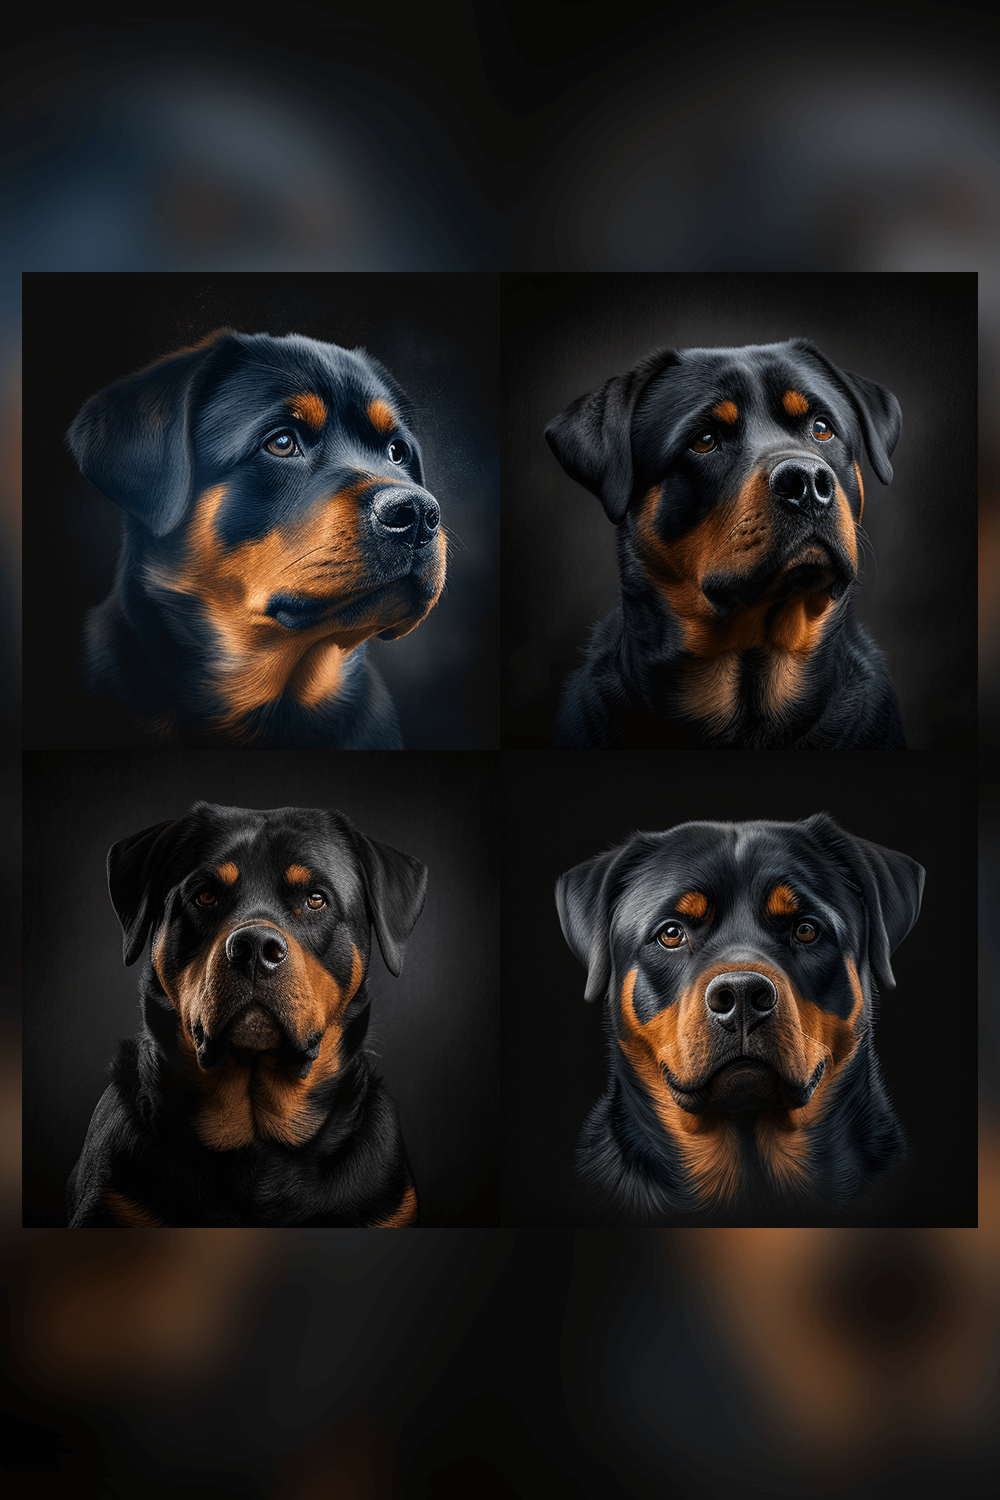 A series of photoshopped images of a dog.